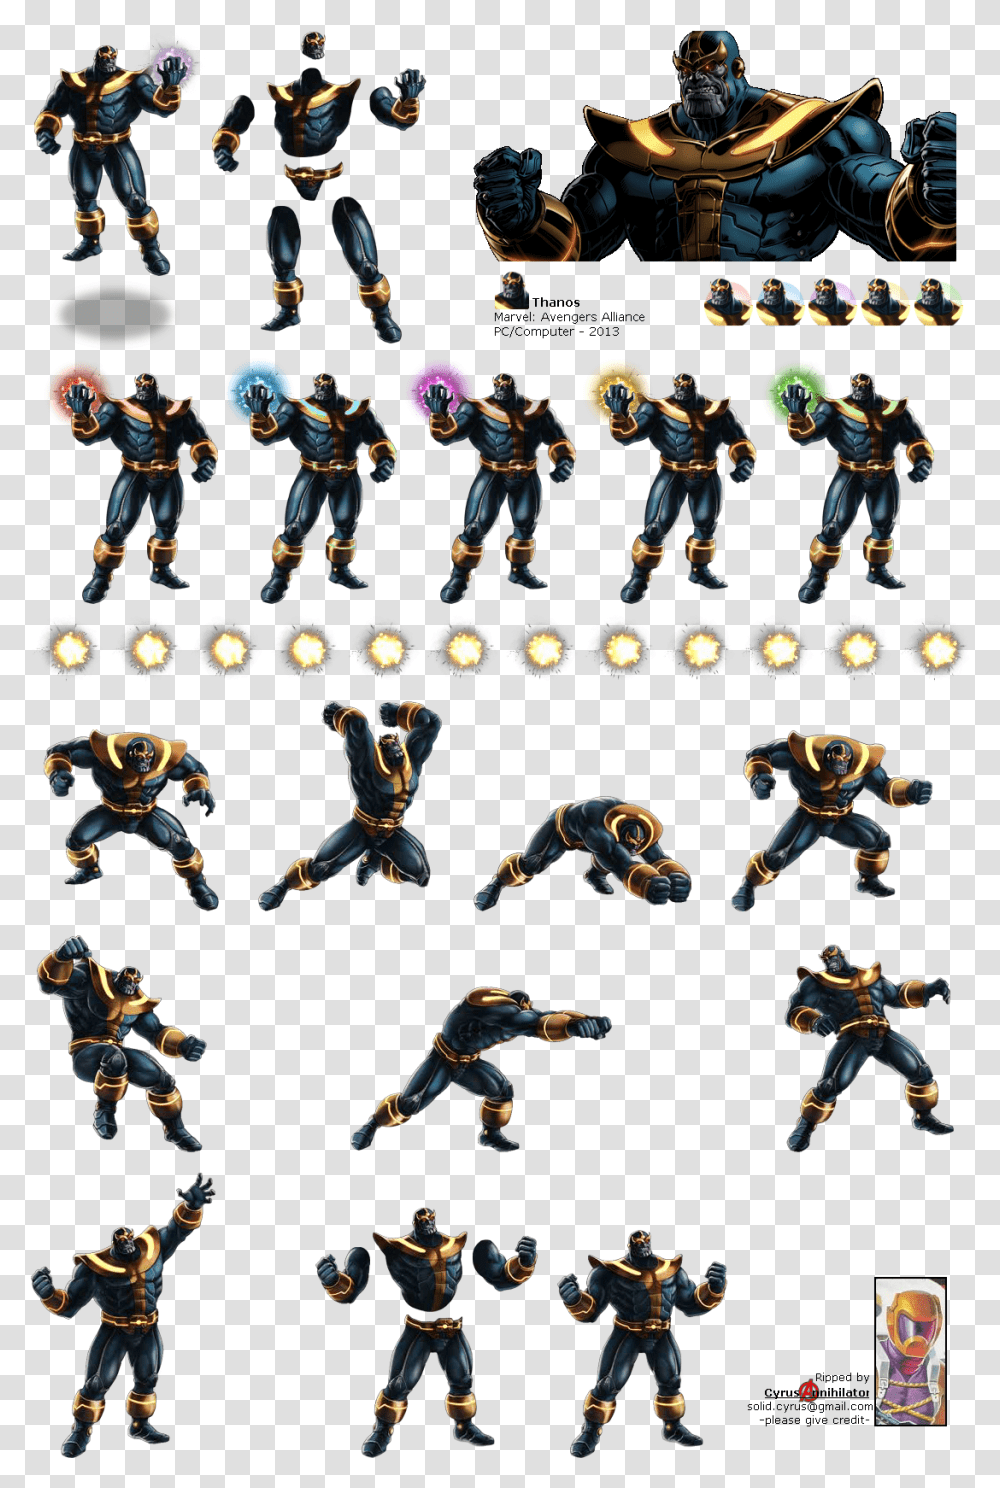 Click For Full Sized Image Thanos Marvel Avengers Alliance Thanos, Person, Collage, Poster, Advertisement Transparent Png